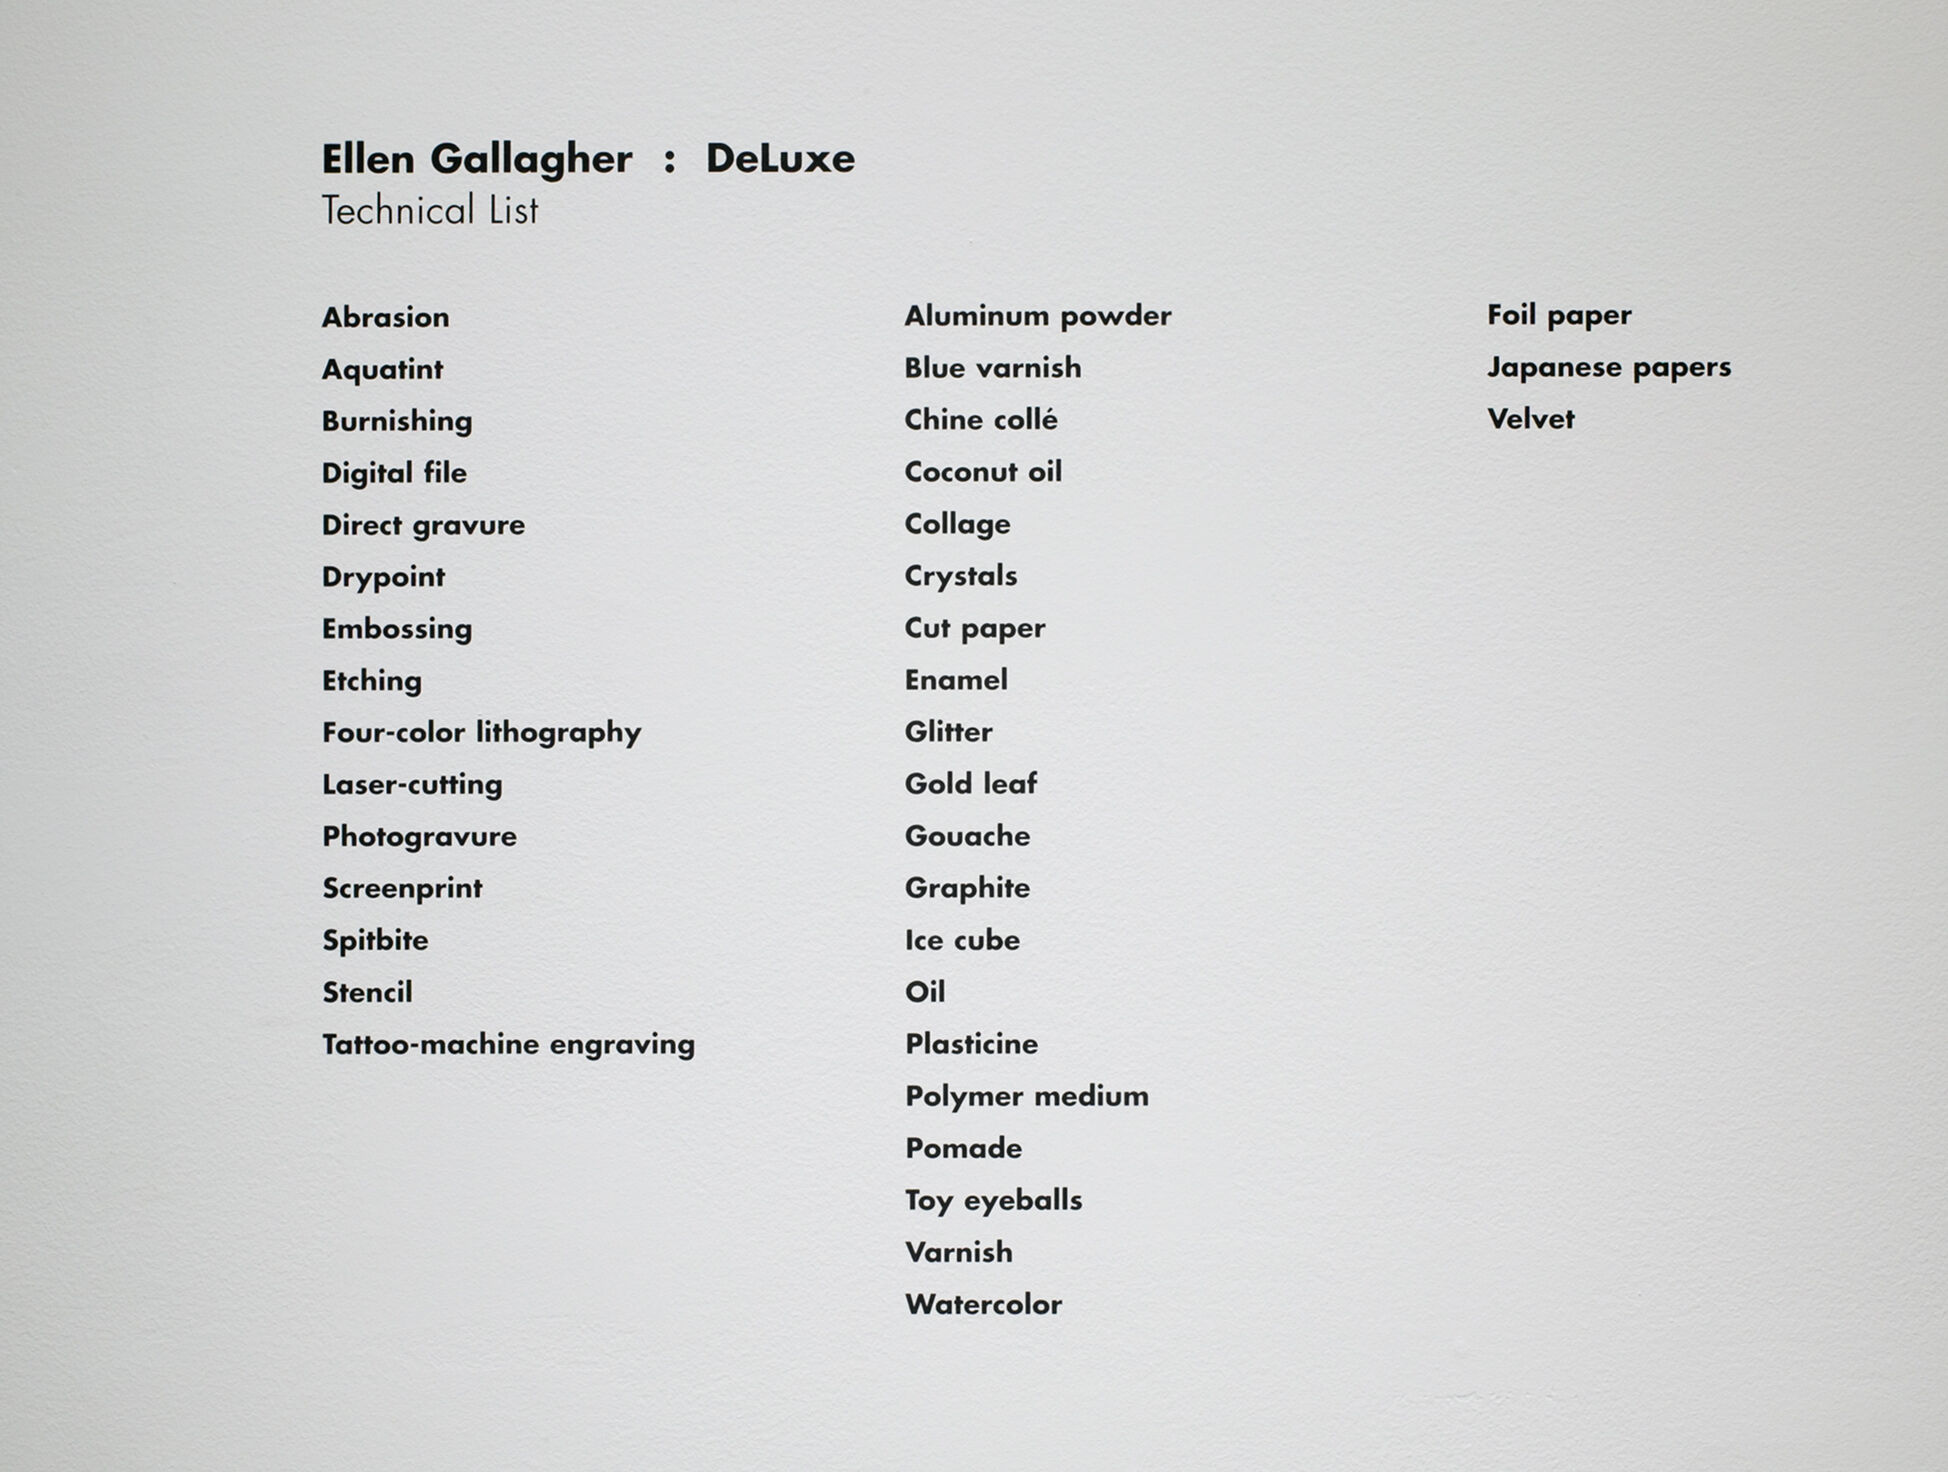 Wall text for Ellen Gallagher: DeLuxe listing the technical methods and materials used.